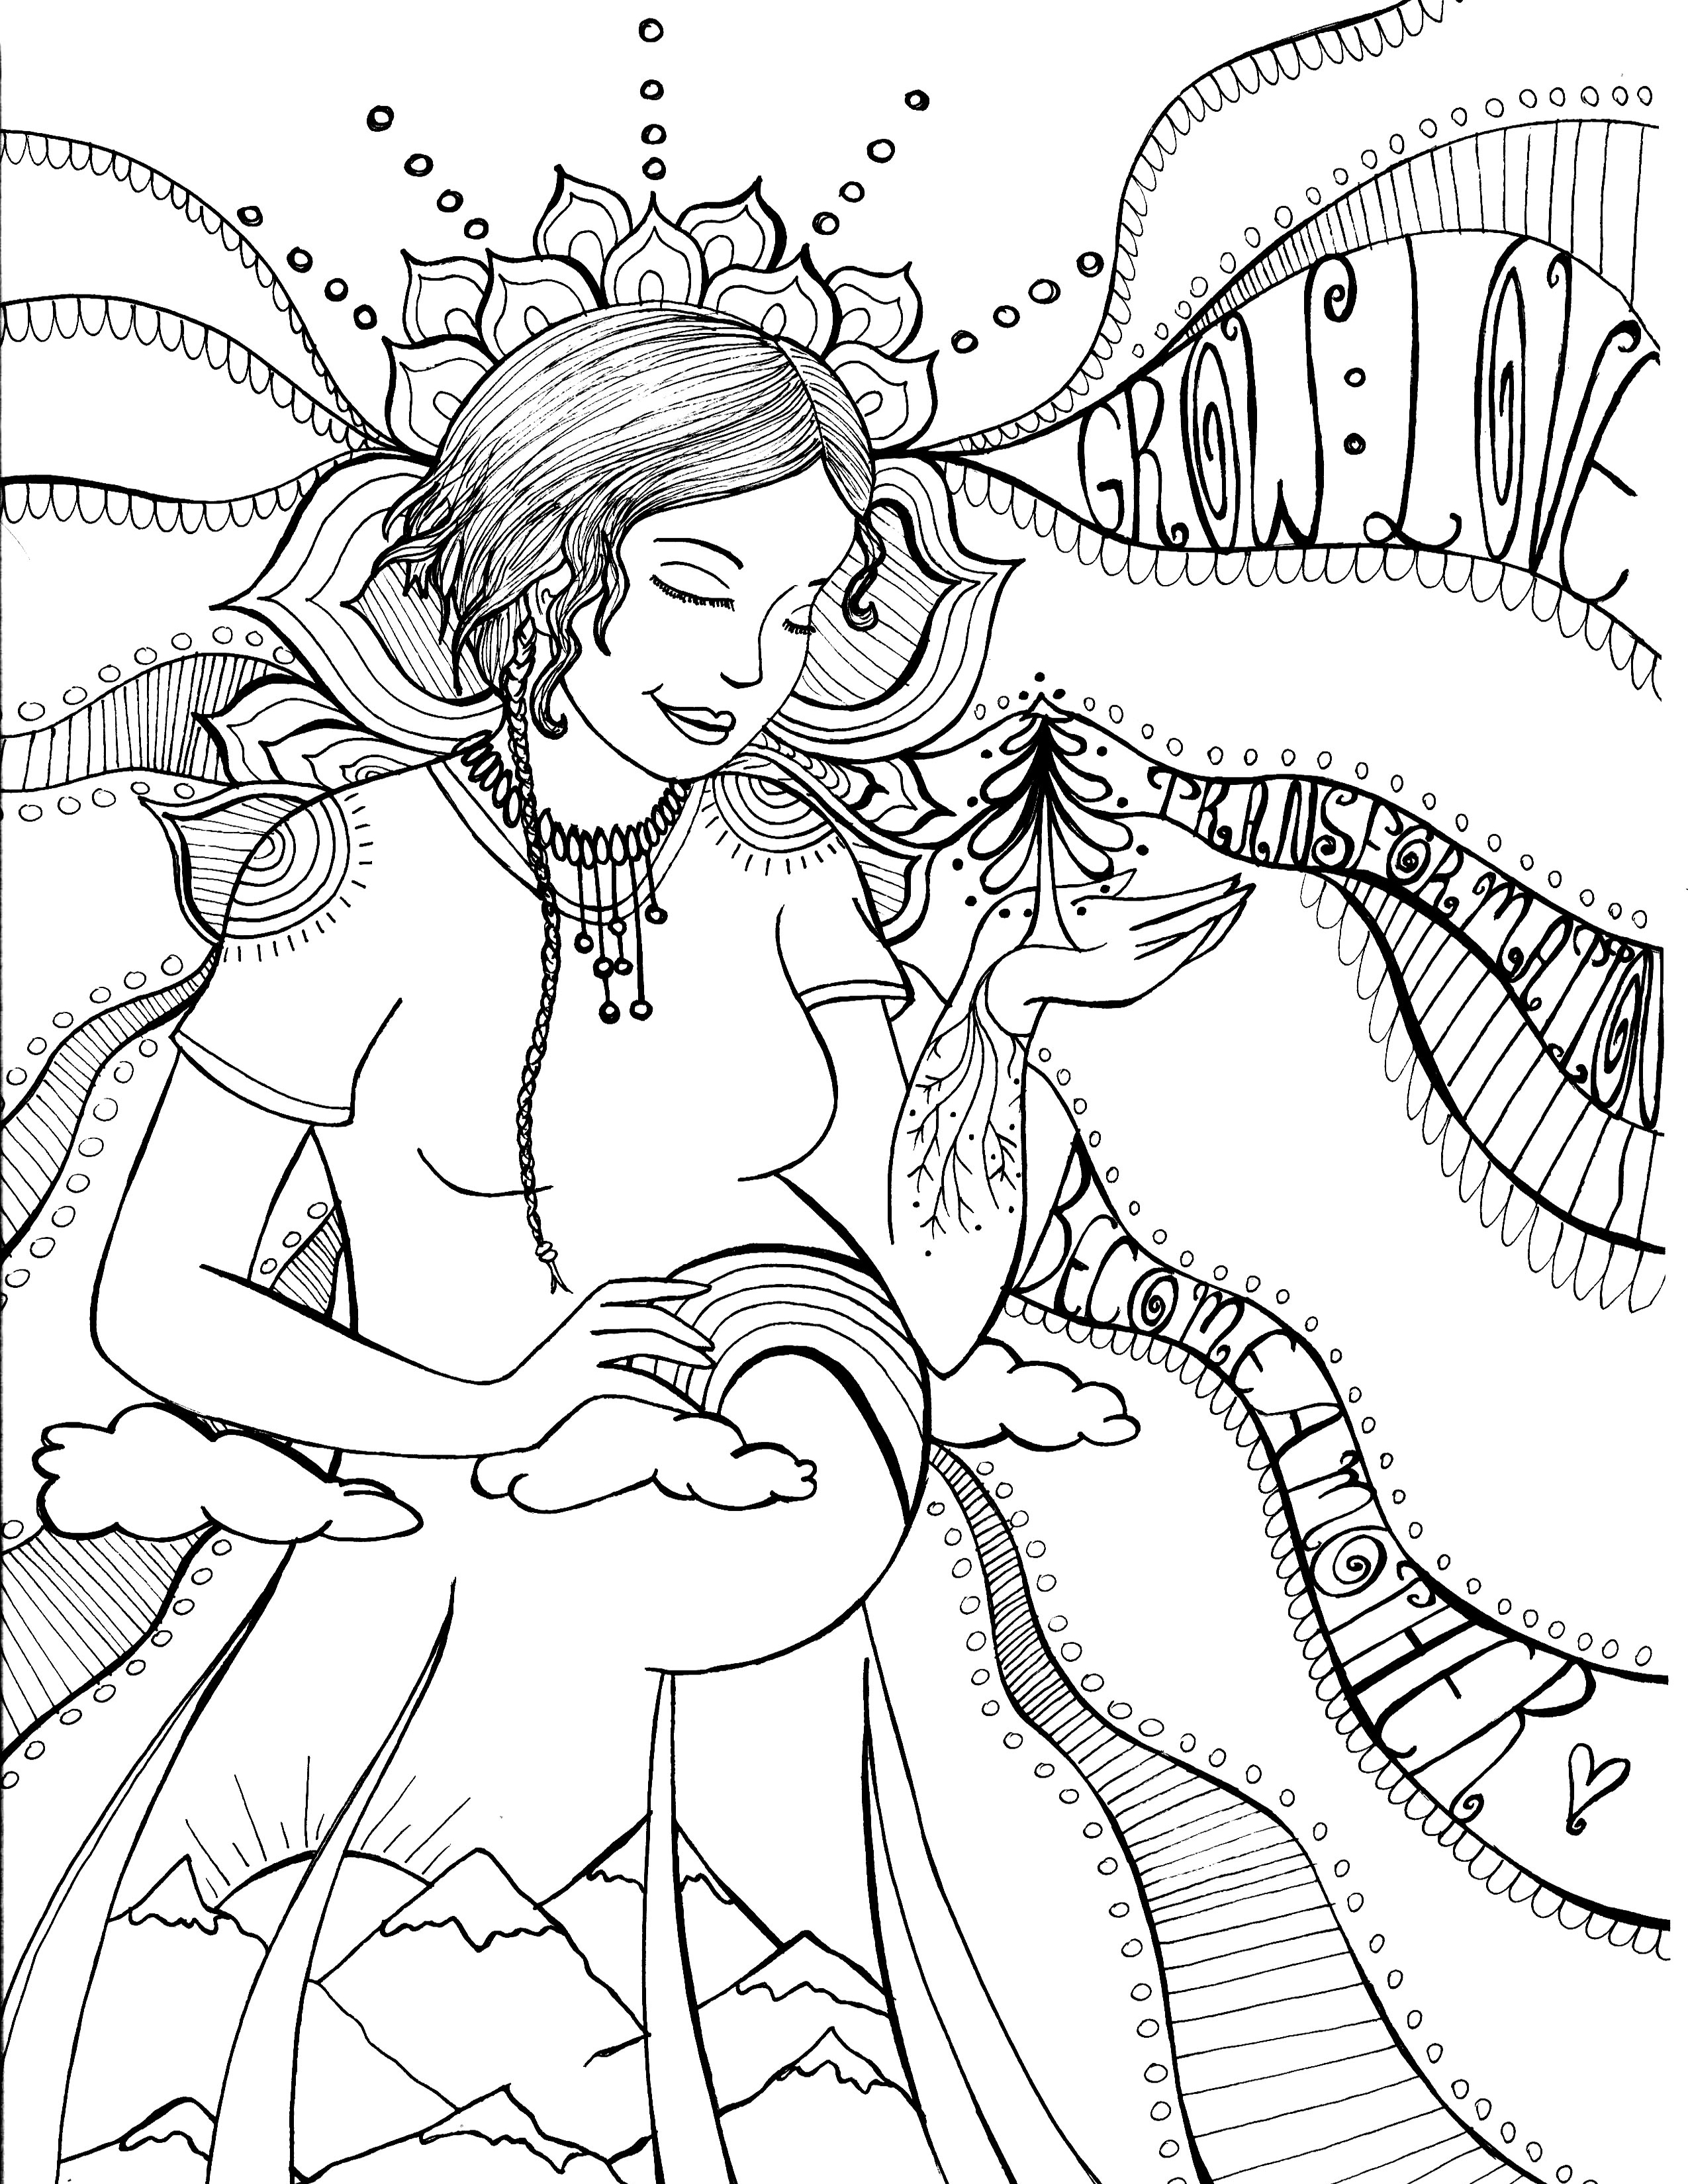 Pregnant Mom Coloring Pages at GetColorings.com | Free printable